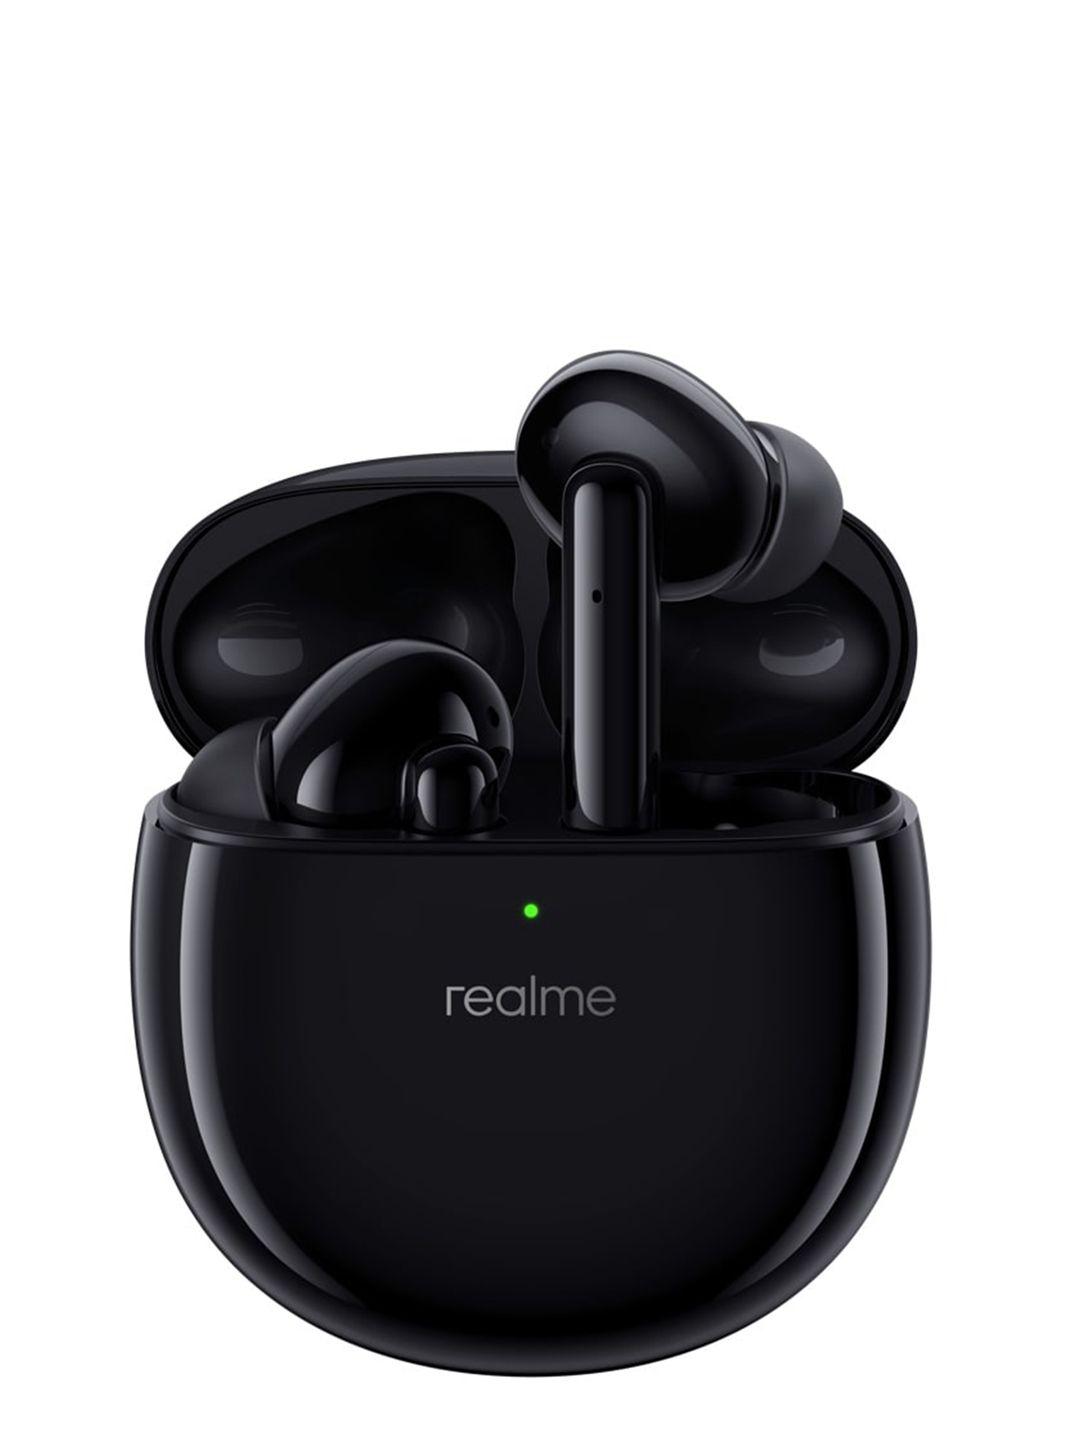 realme matte black buds air pro active noise cancellation enabled bluetooth headset- true wireless